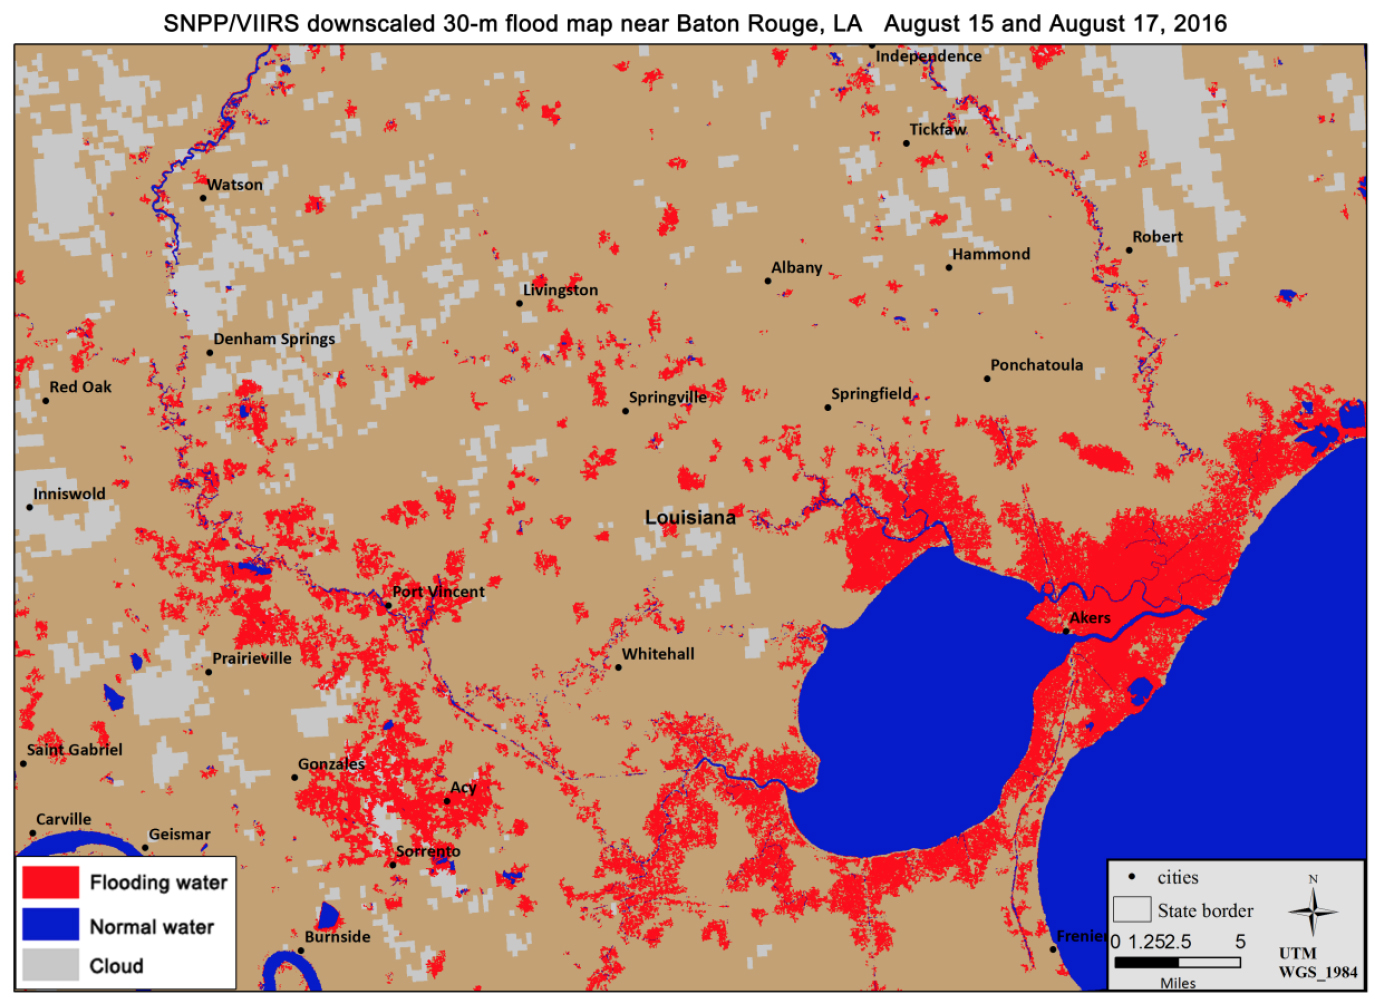 The flood map graphic shows an eastern portion of Louisiana surrounding Lake Maurepas, a large inland body of water. The land is rendered in tan, with the normal water levels in royal blue. Areas covered by cloud, spread throughout the image, are rendered in grey. Flood waters, rendered in red, surround the lake and spread into the western part of the image around the river that feeds Lake Maurepas.